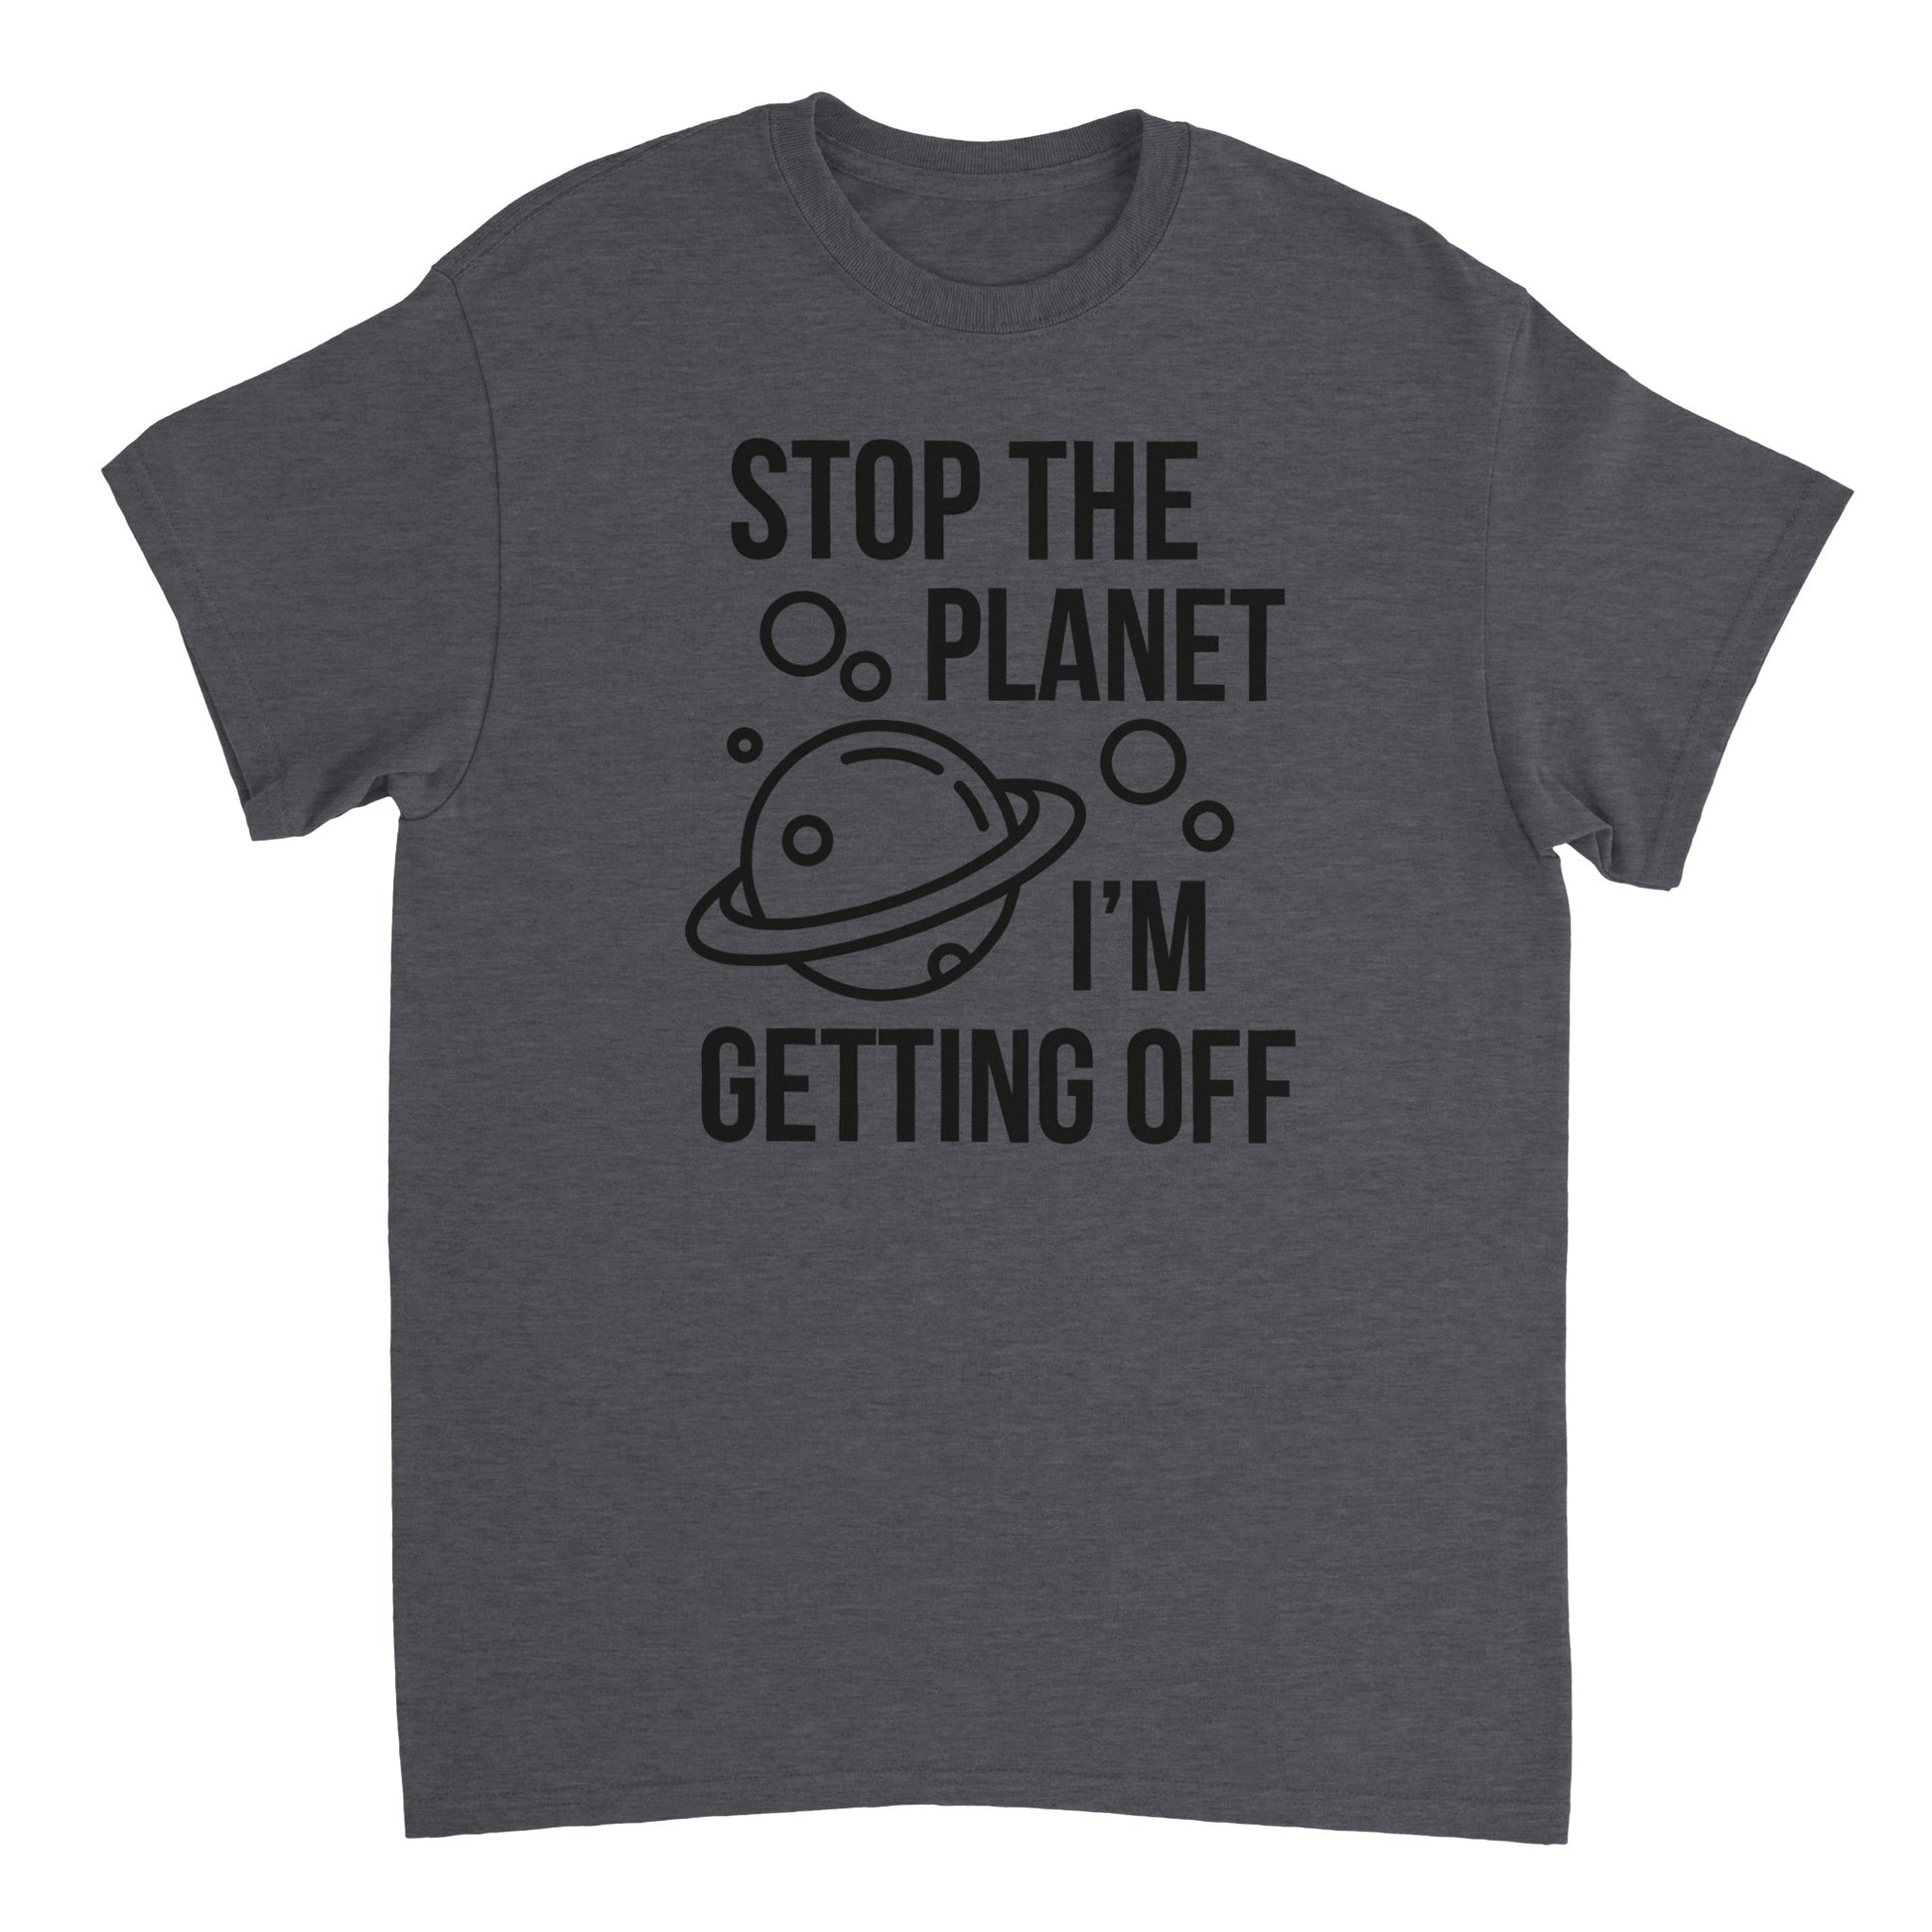 a t - shirt that says stop the planet i'm getting off